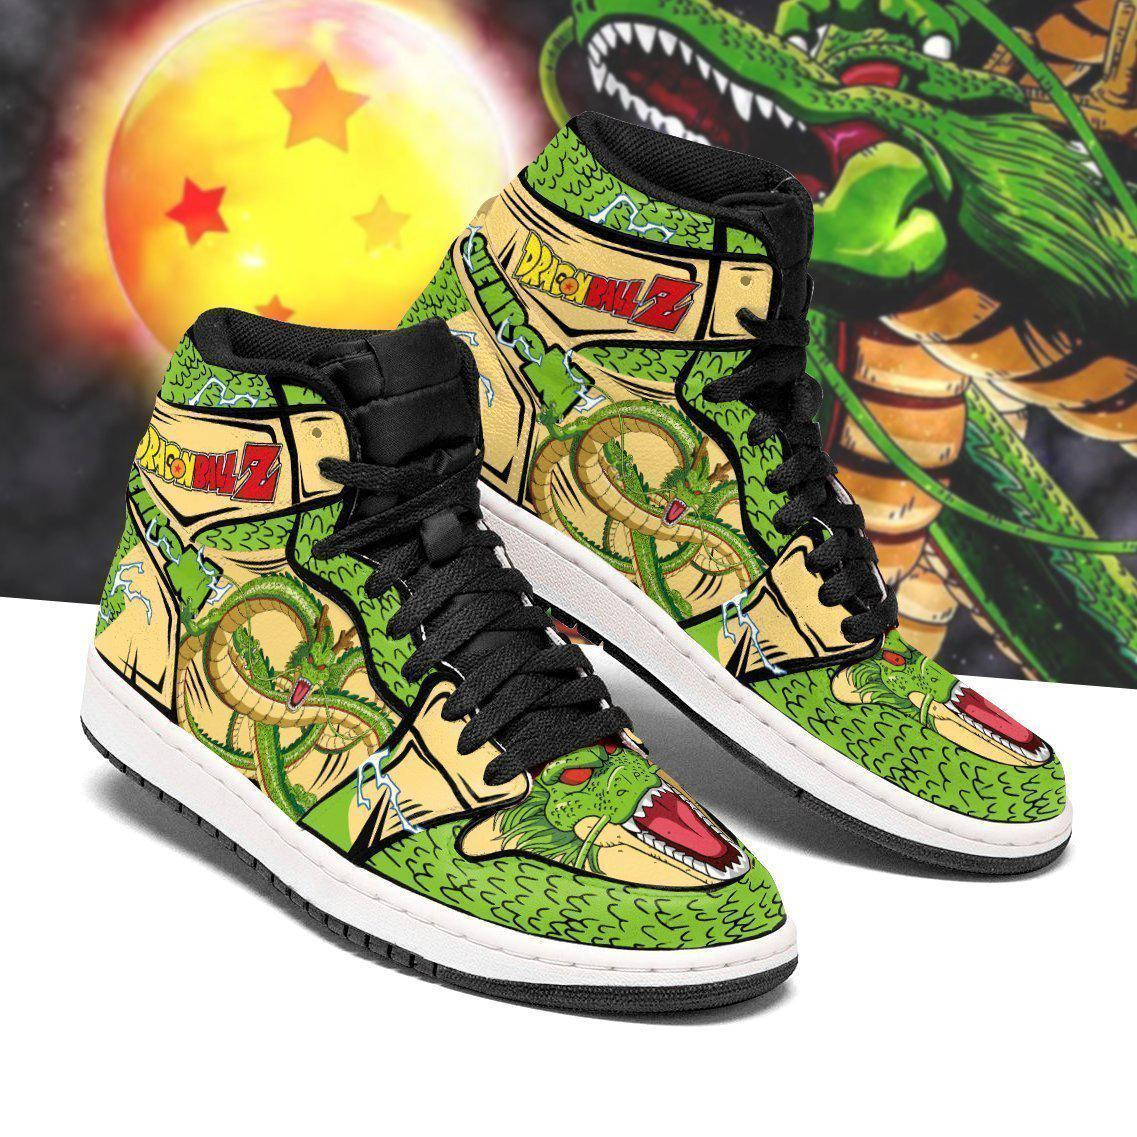 Choose for yourself a custom shoe or are you an Anime fan 18